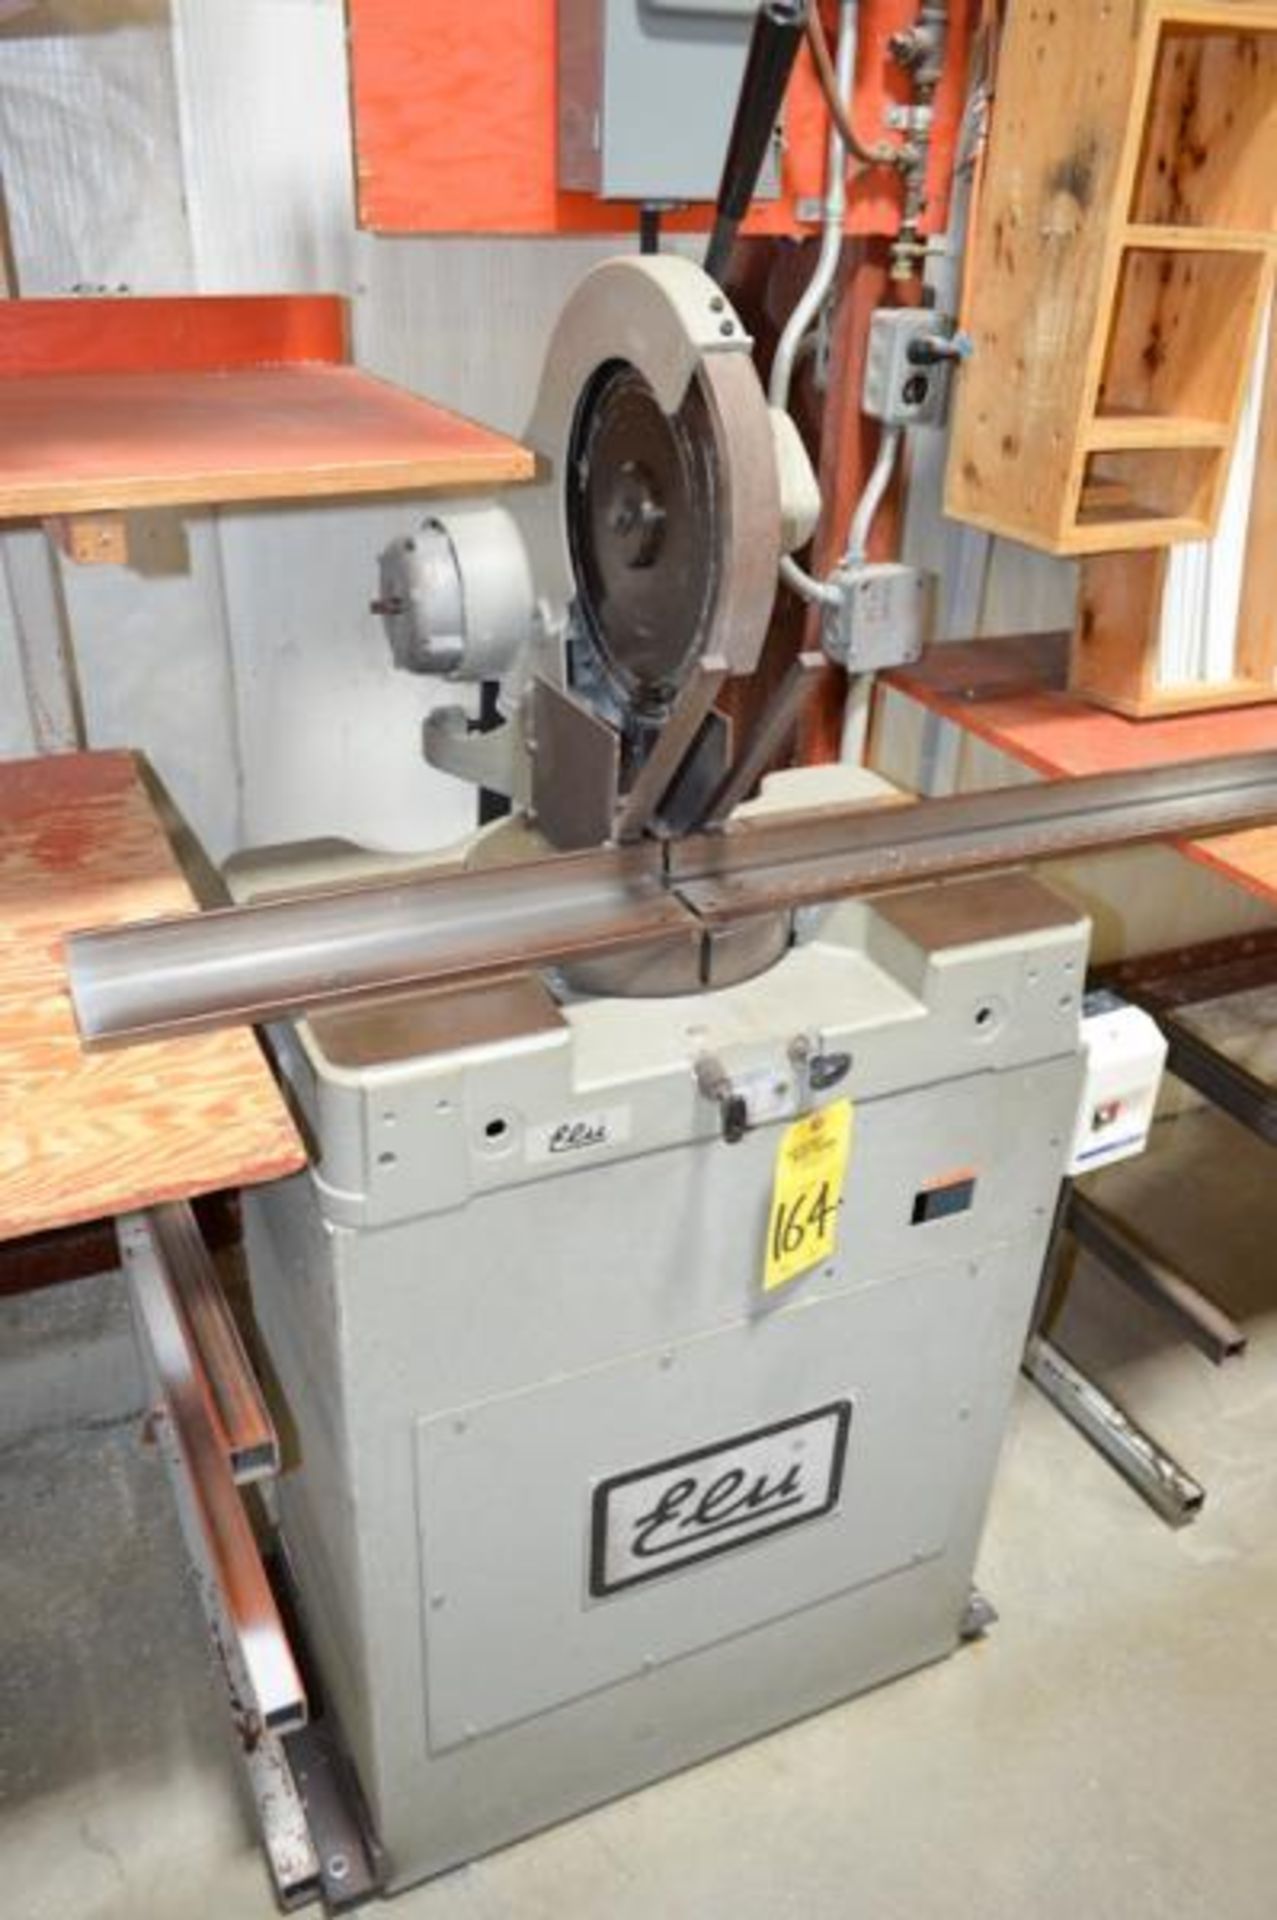 ELU MGS 72 300MM (11.81”) BENCH-TOP MITER SAW W/ CABINET BASE, 11” X 25” X 37”H TABLE SIZE, 3,400